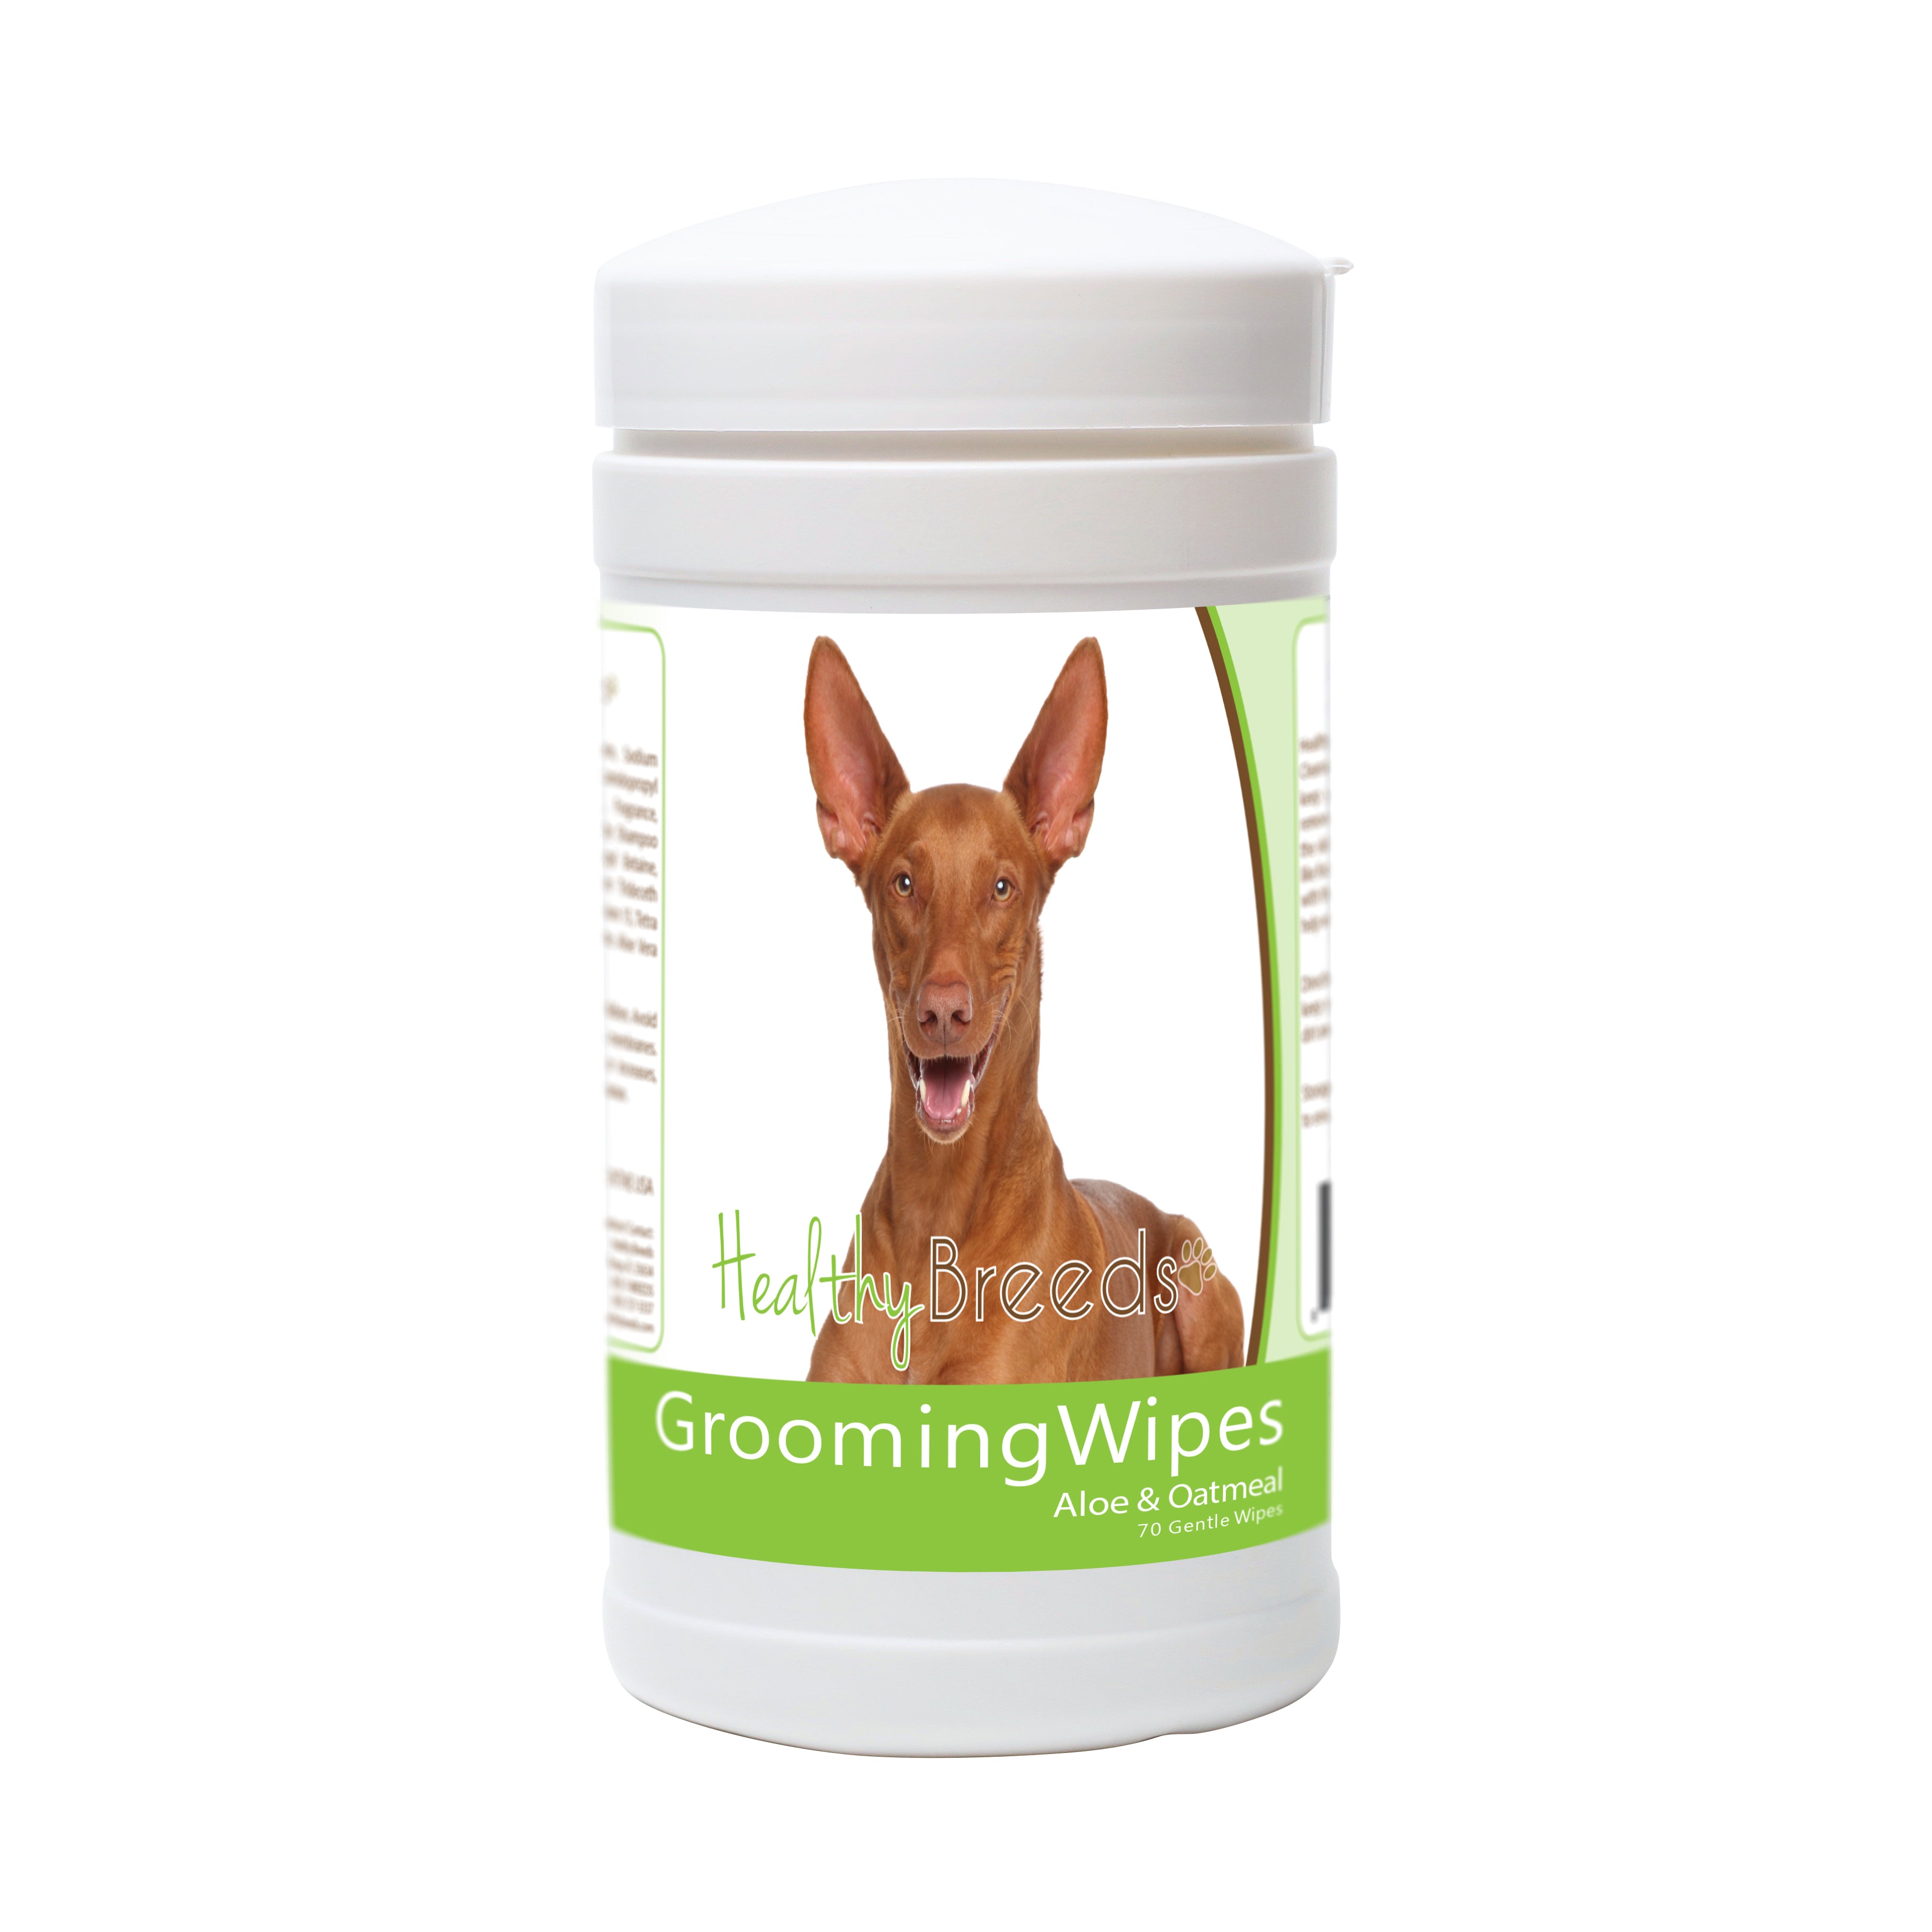 Pharaoh Hound Grooming Wipes 70 Count